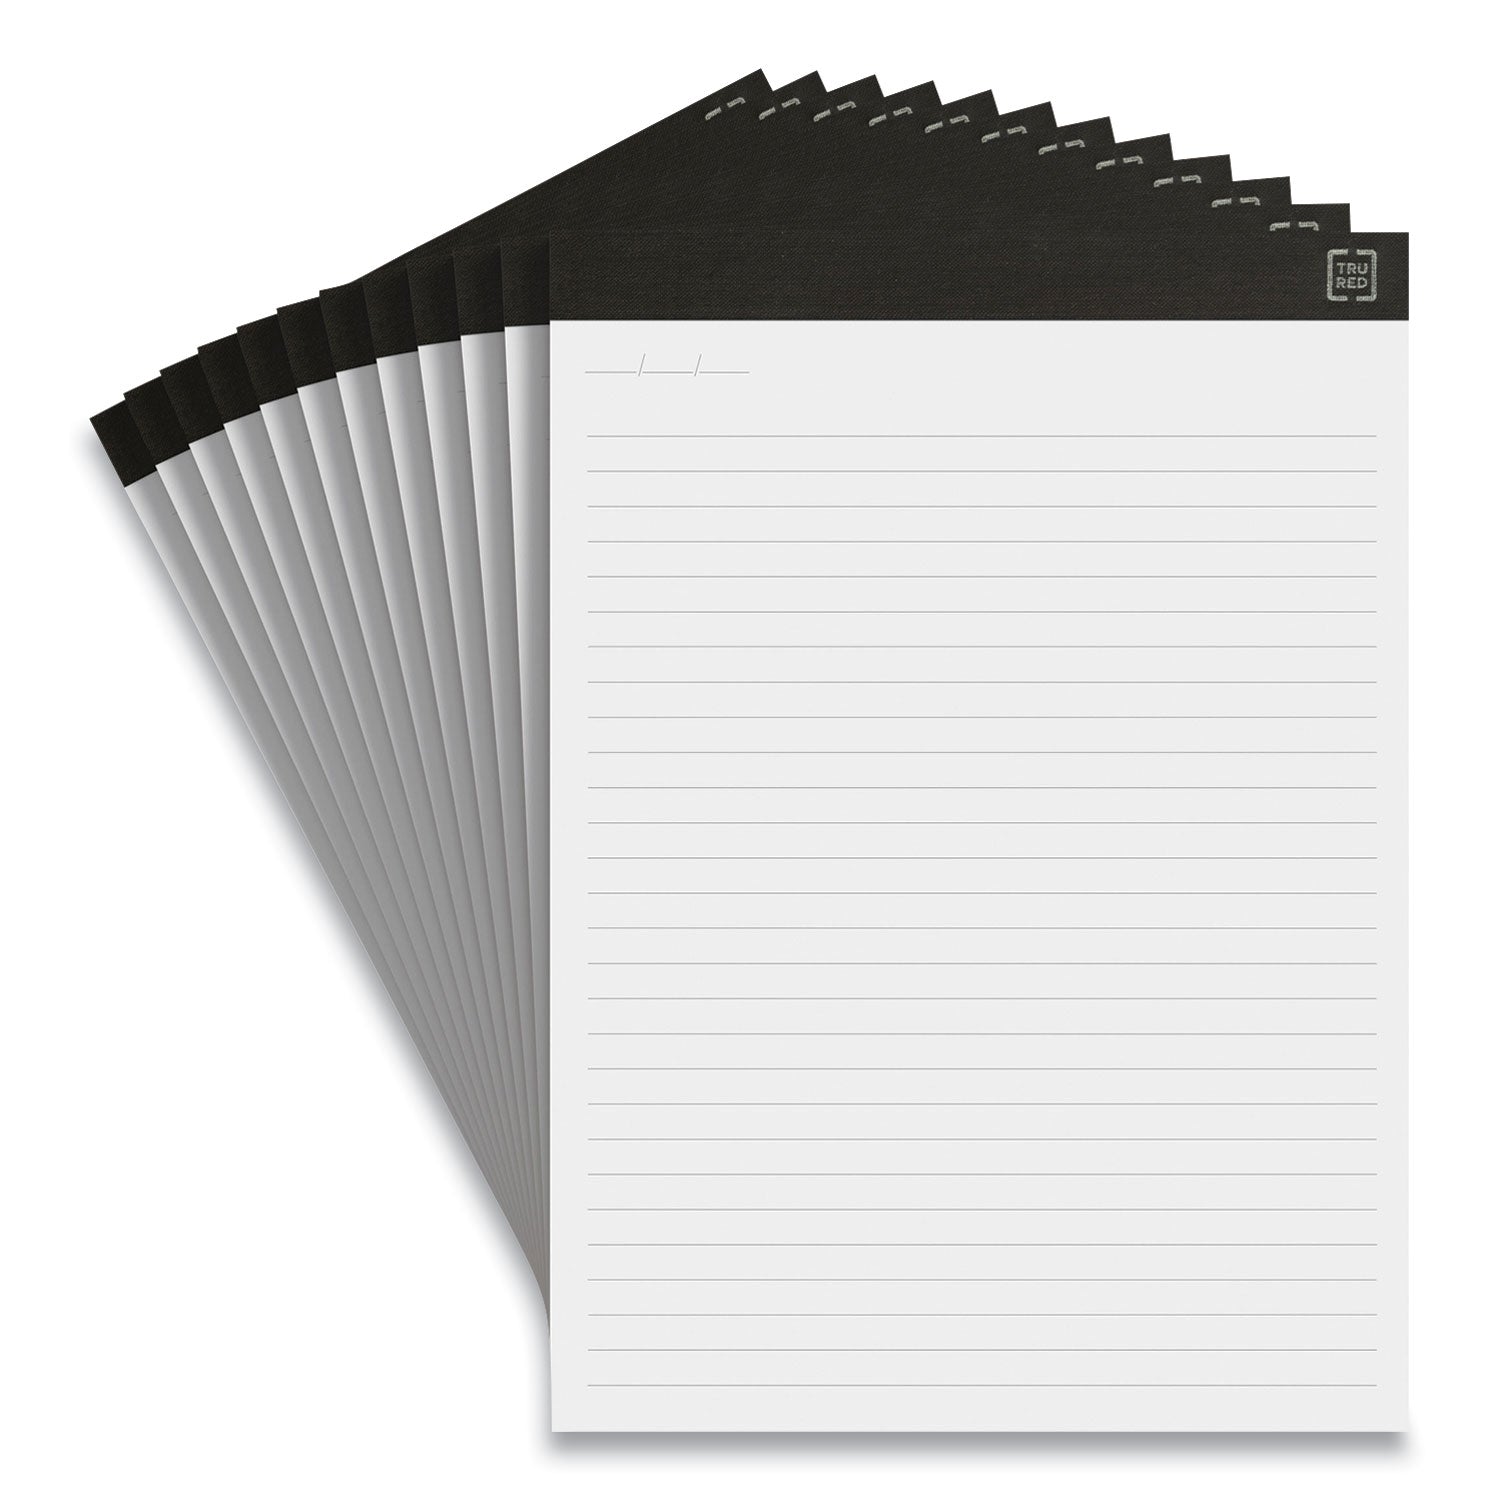 notepads-wide-legal-rule-50-white-85-x-1175-sheets-12-pack_tud24419921 - 1